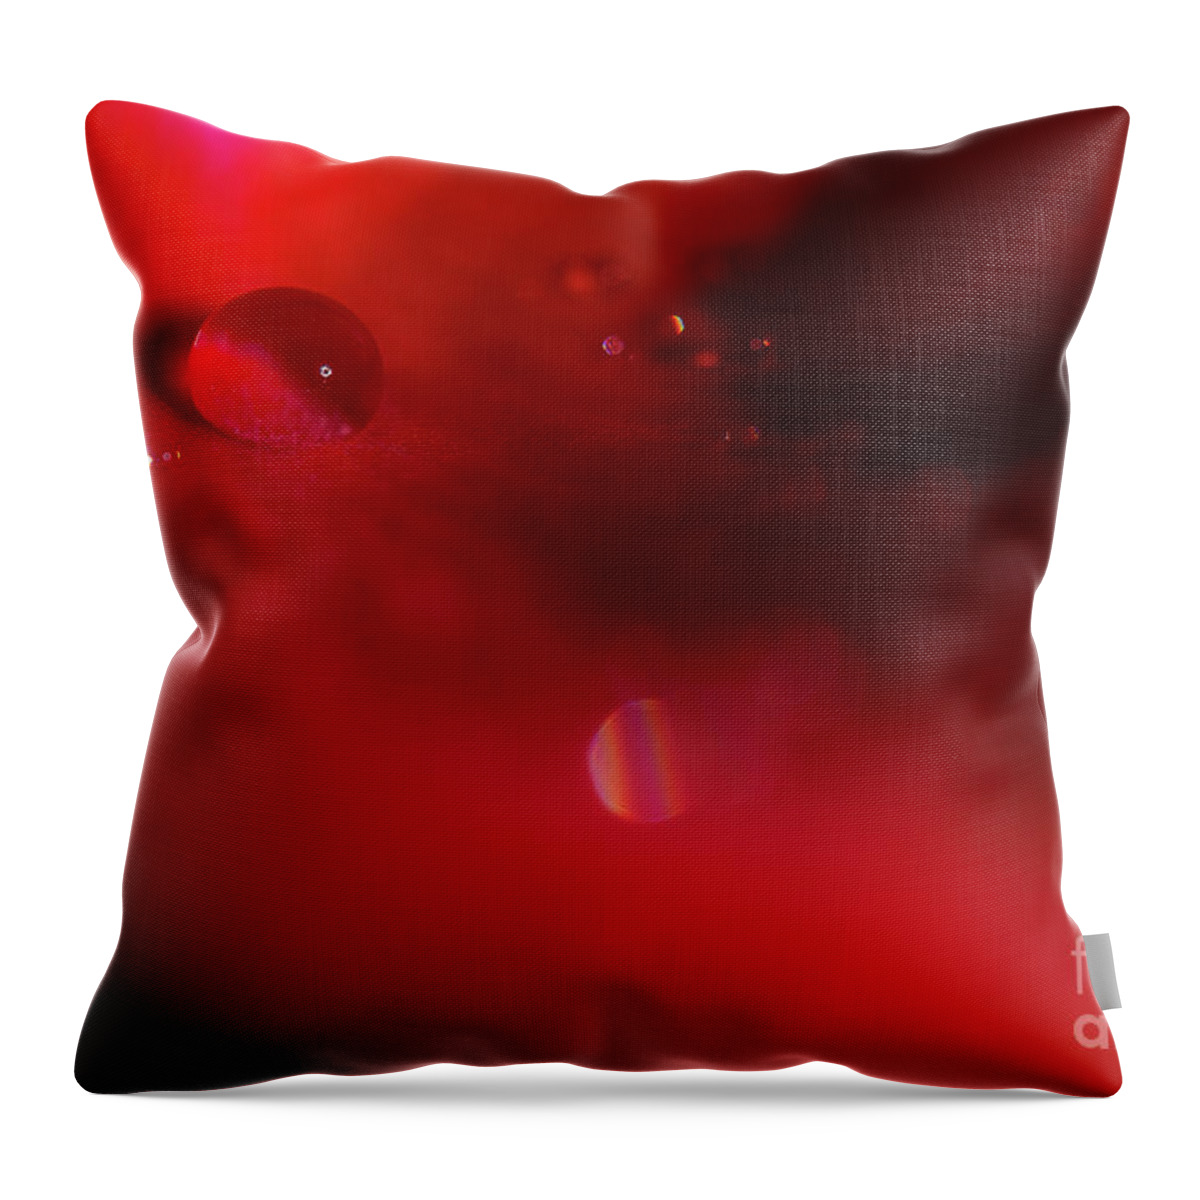 Rose Throw Pillow featuring the photograph Rose Petal Droplet 2 by Mike Eingle